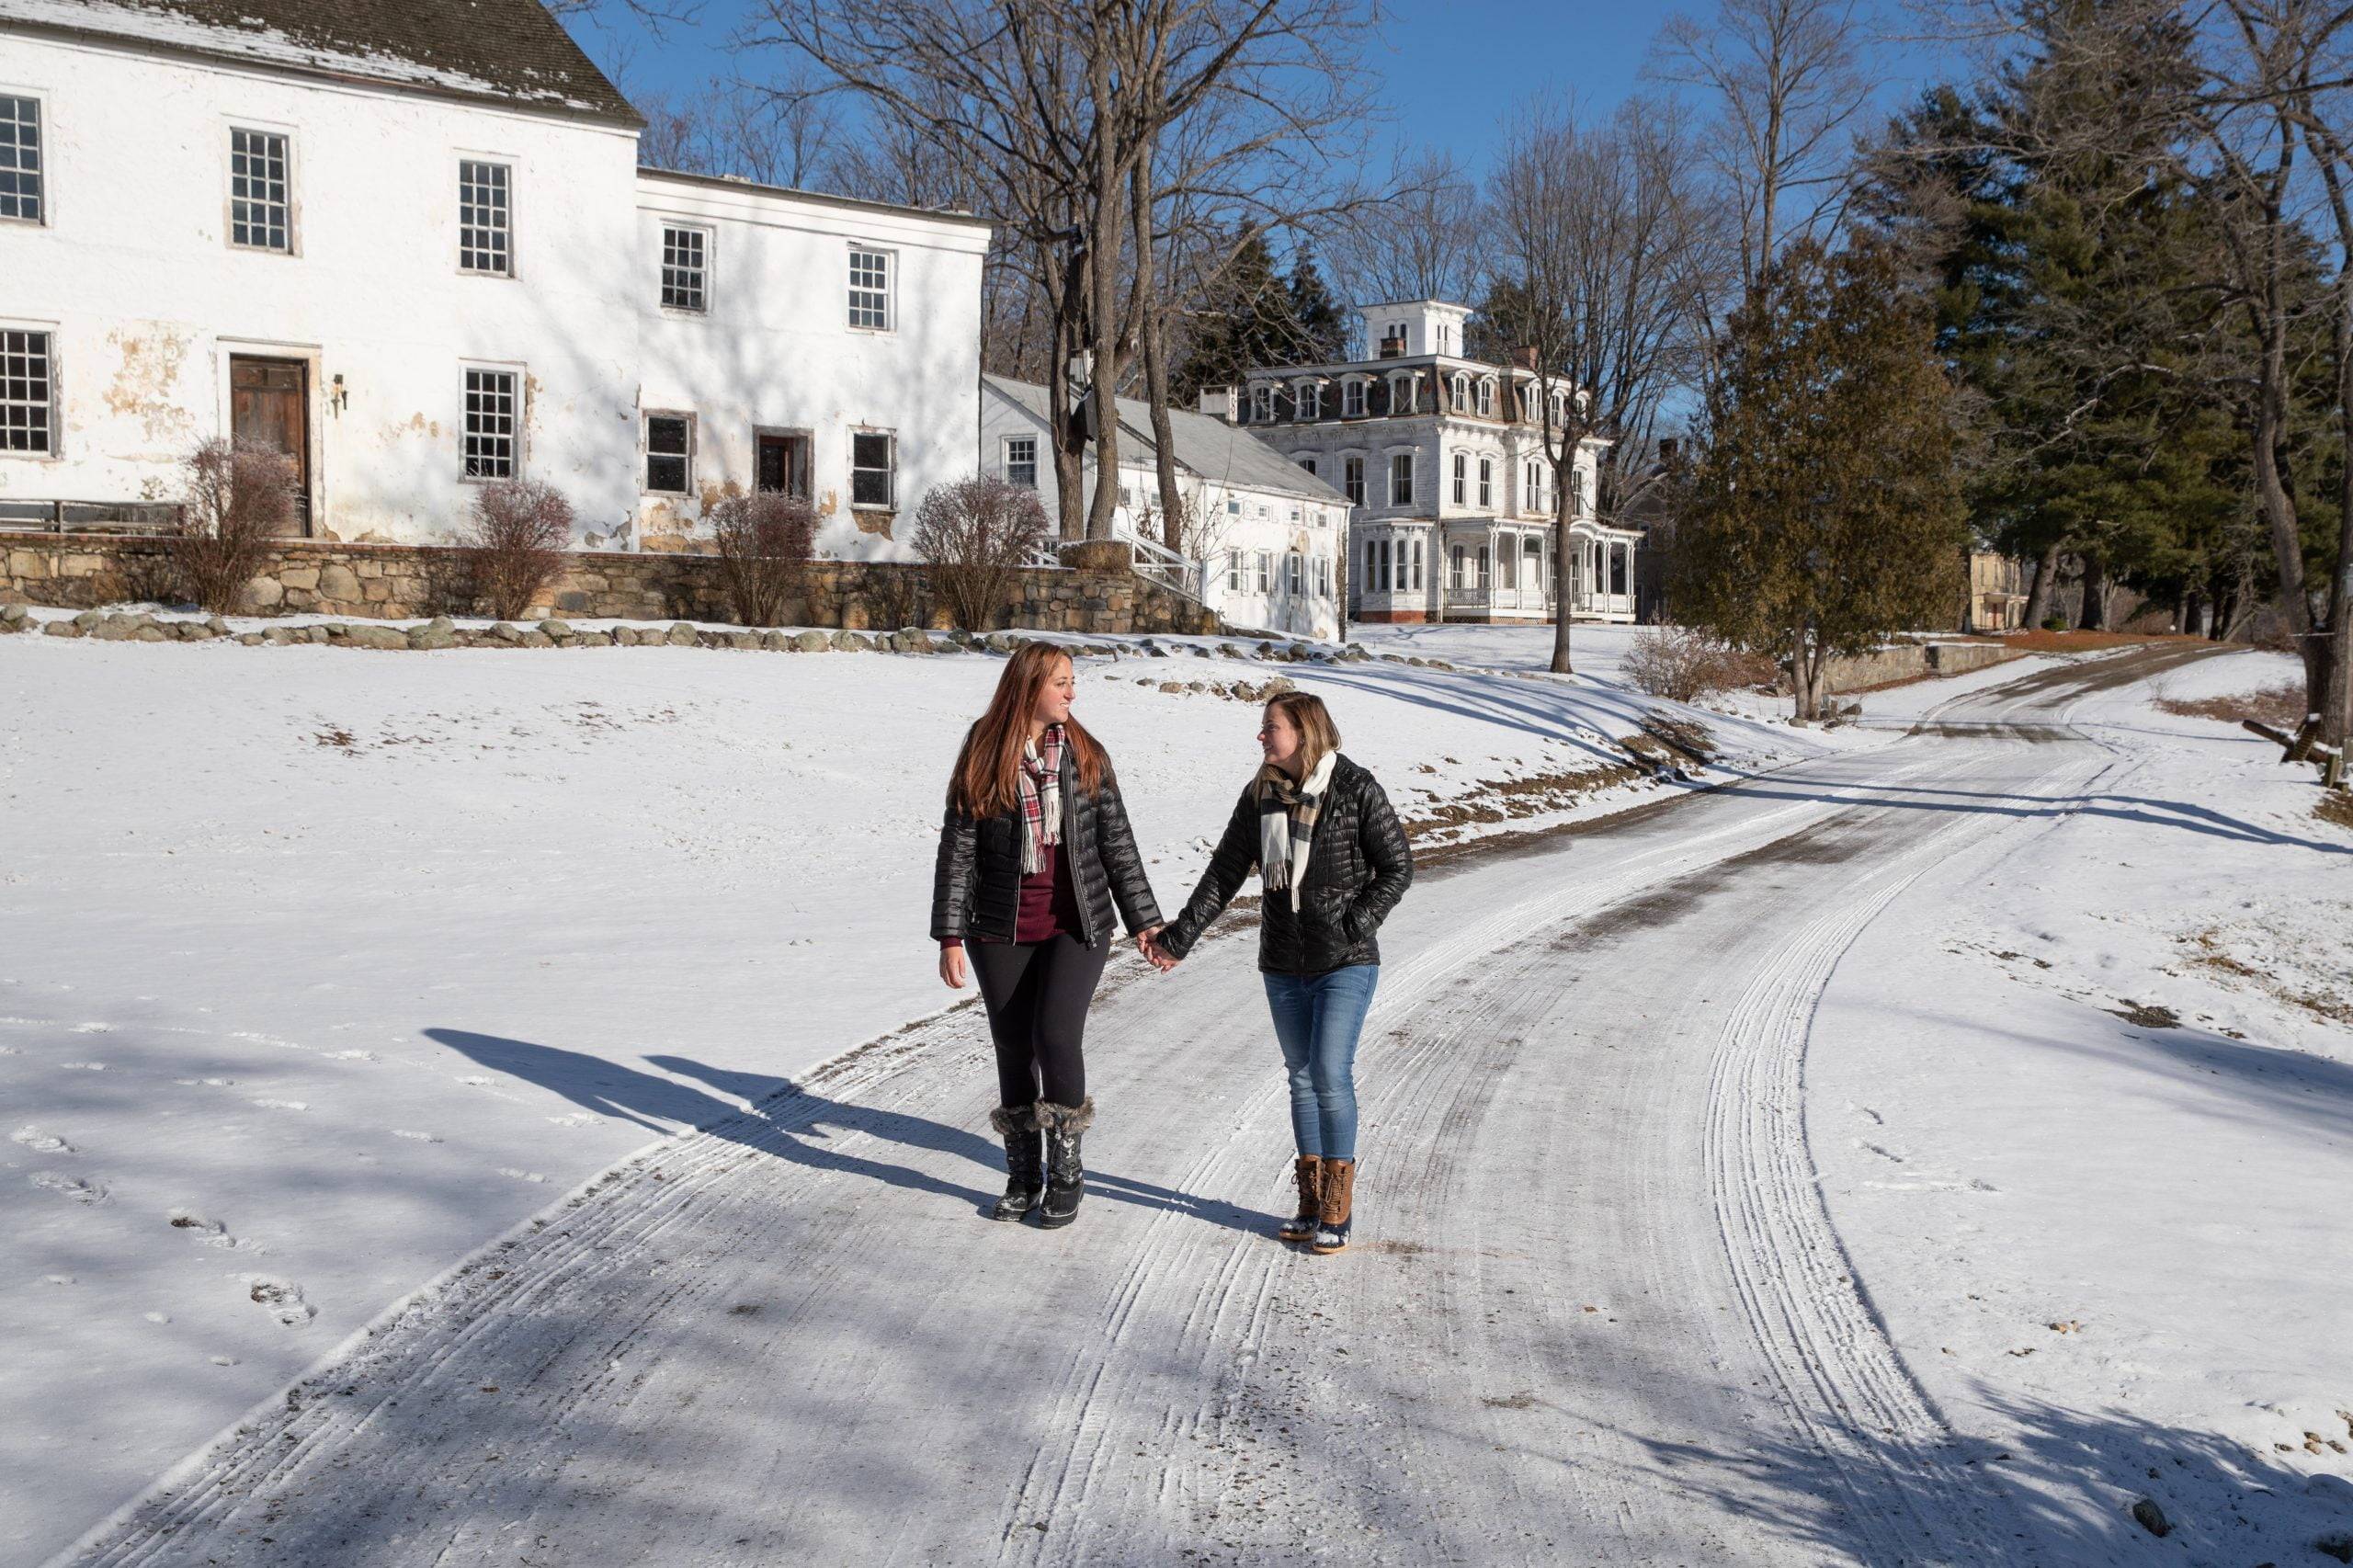 Two women walking down a snowy road in front of a house.